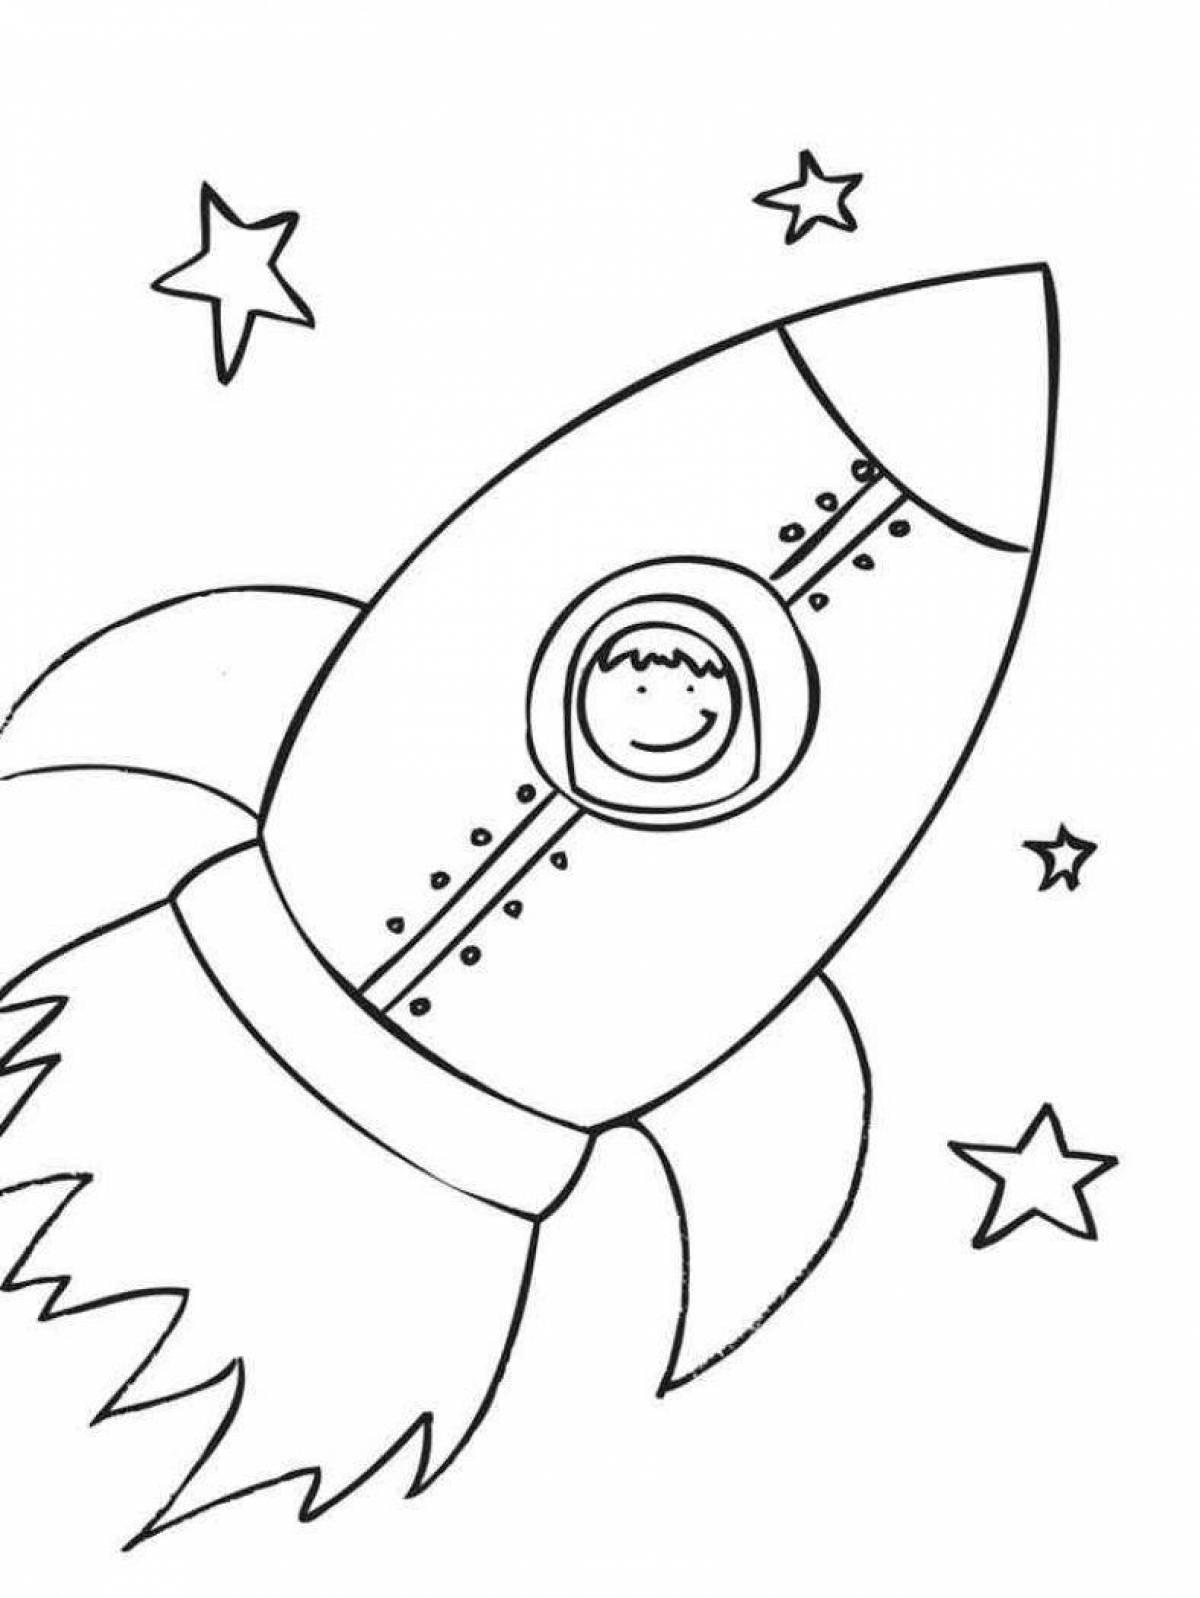 Large space rocket coloring page